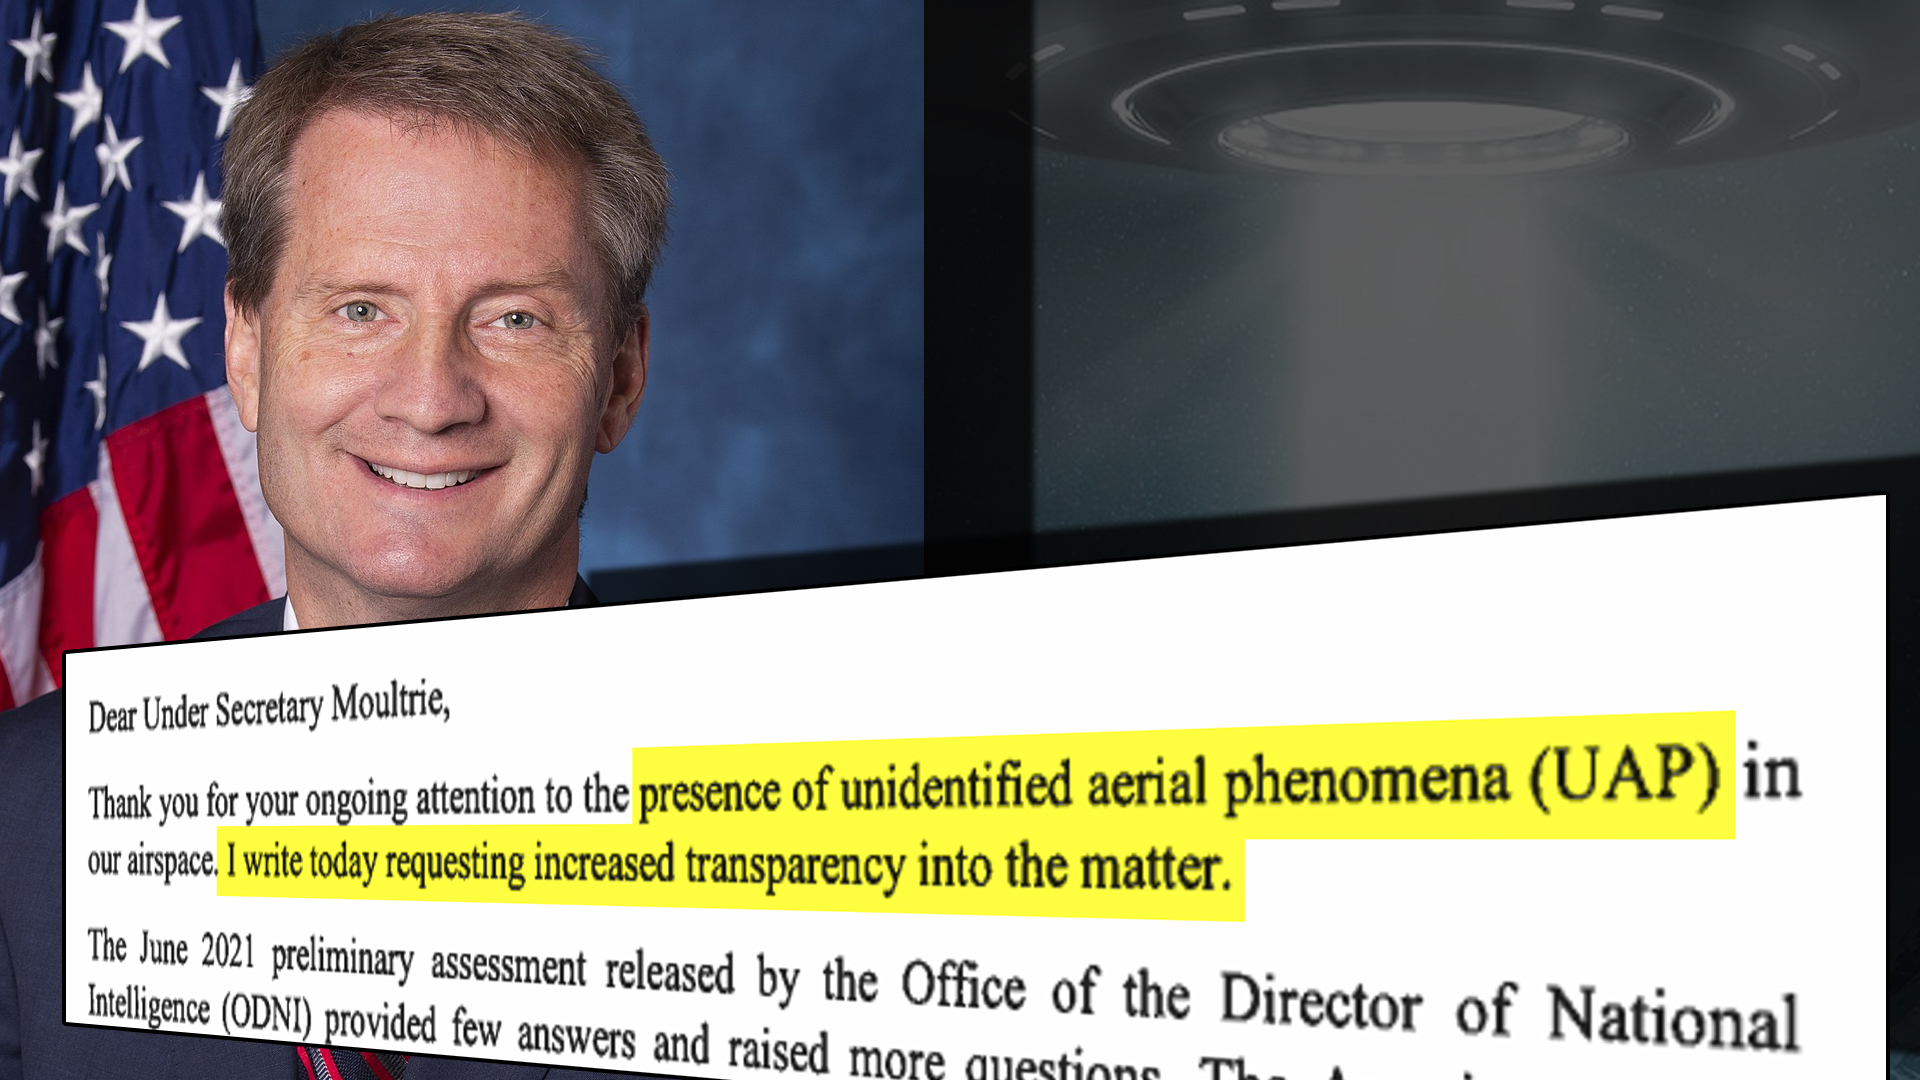 Rep. Tim Burchett: “Our citizens can handle the truth [about UFOs]…”